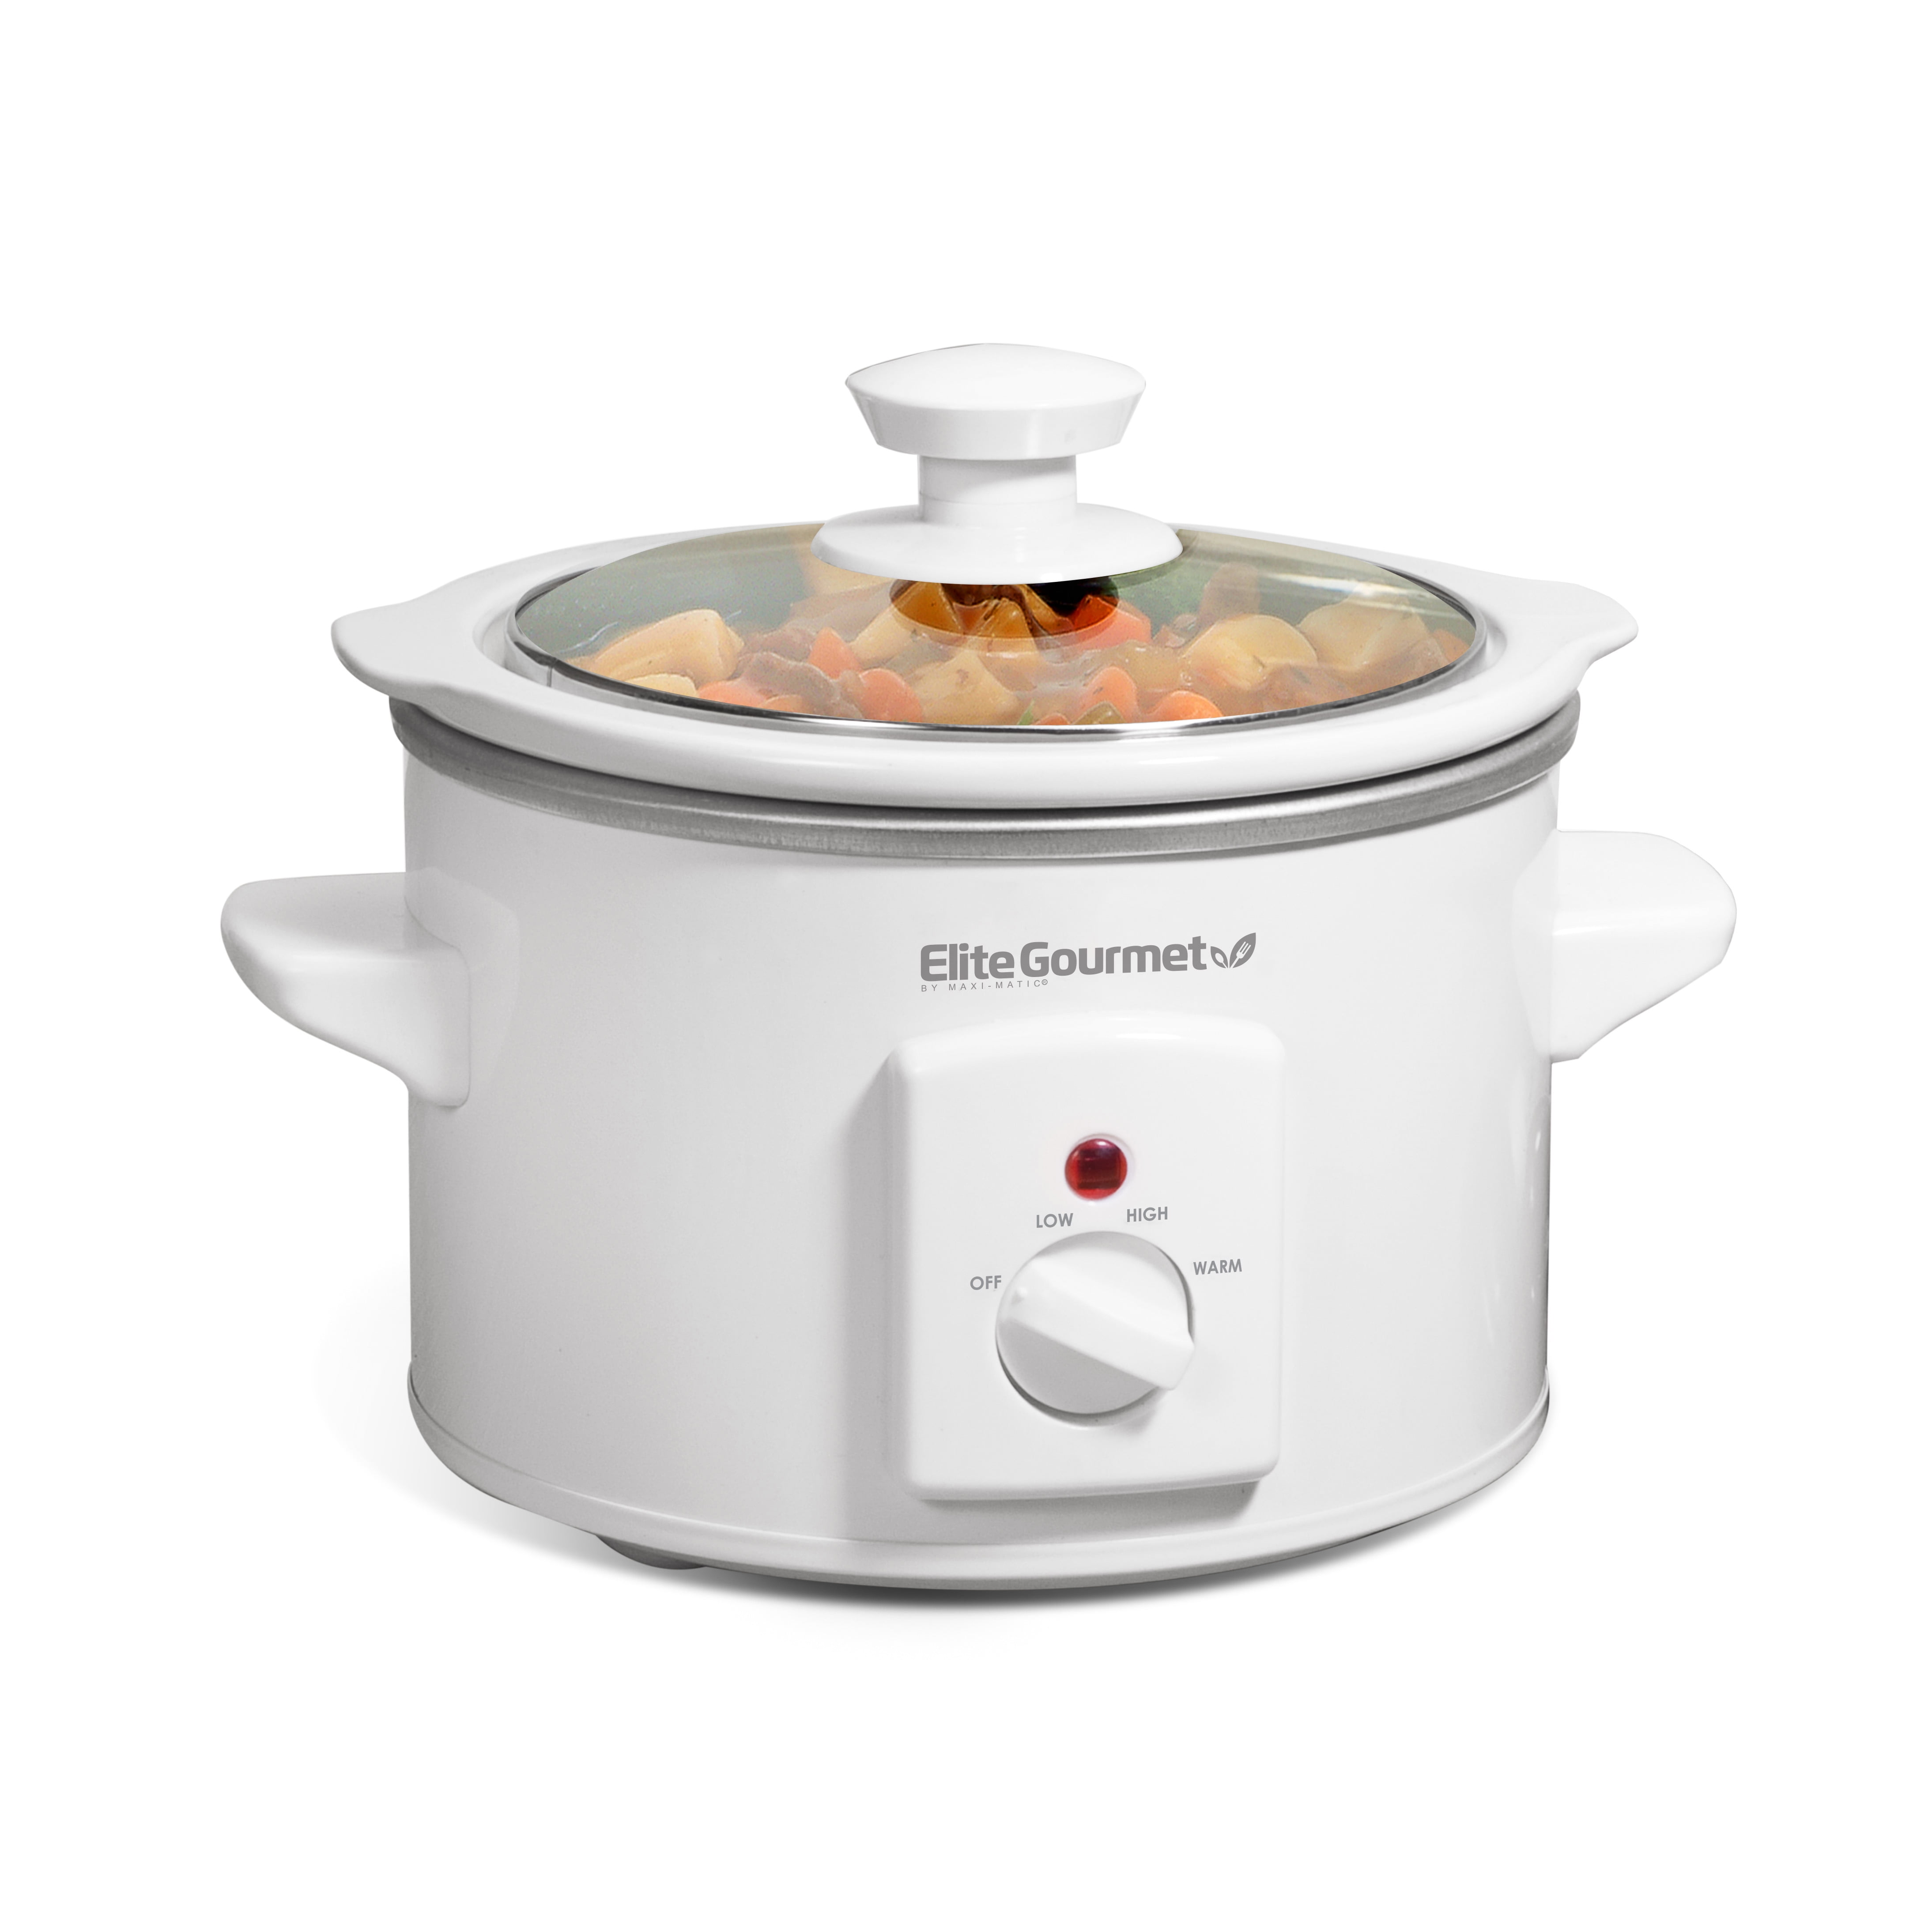 Eternal Stainless Steel Slow Cooker - 1.5 qt